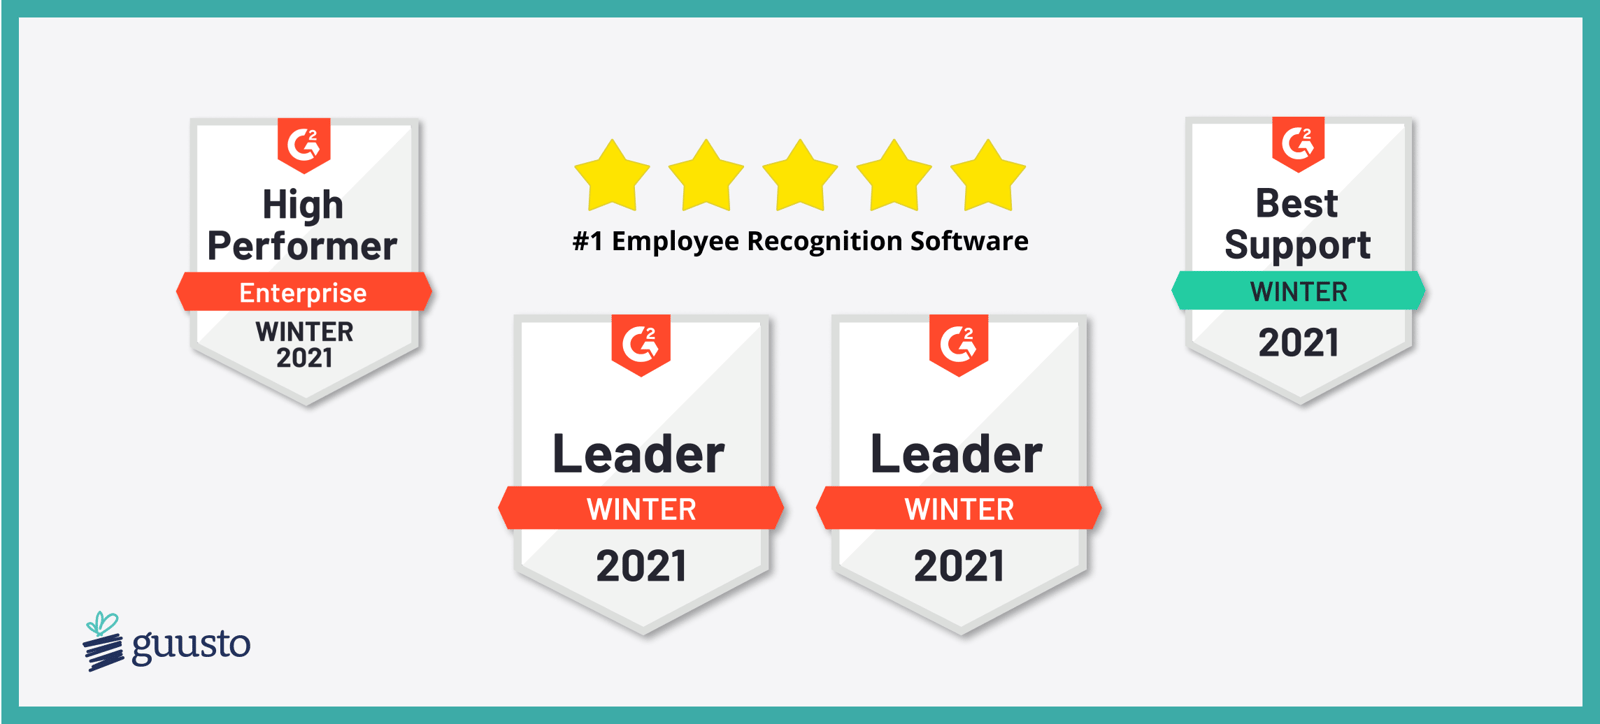 Guusto Named Leader in Employee Recognition & Loyalty Management | Winter 2021 G2 Awards